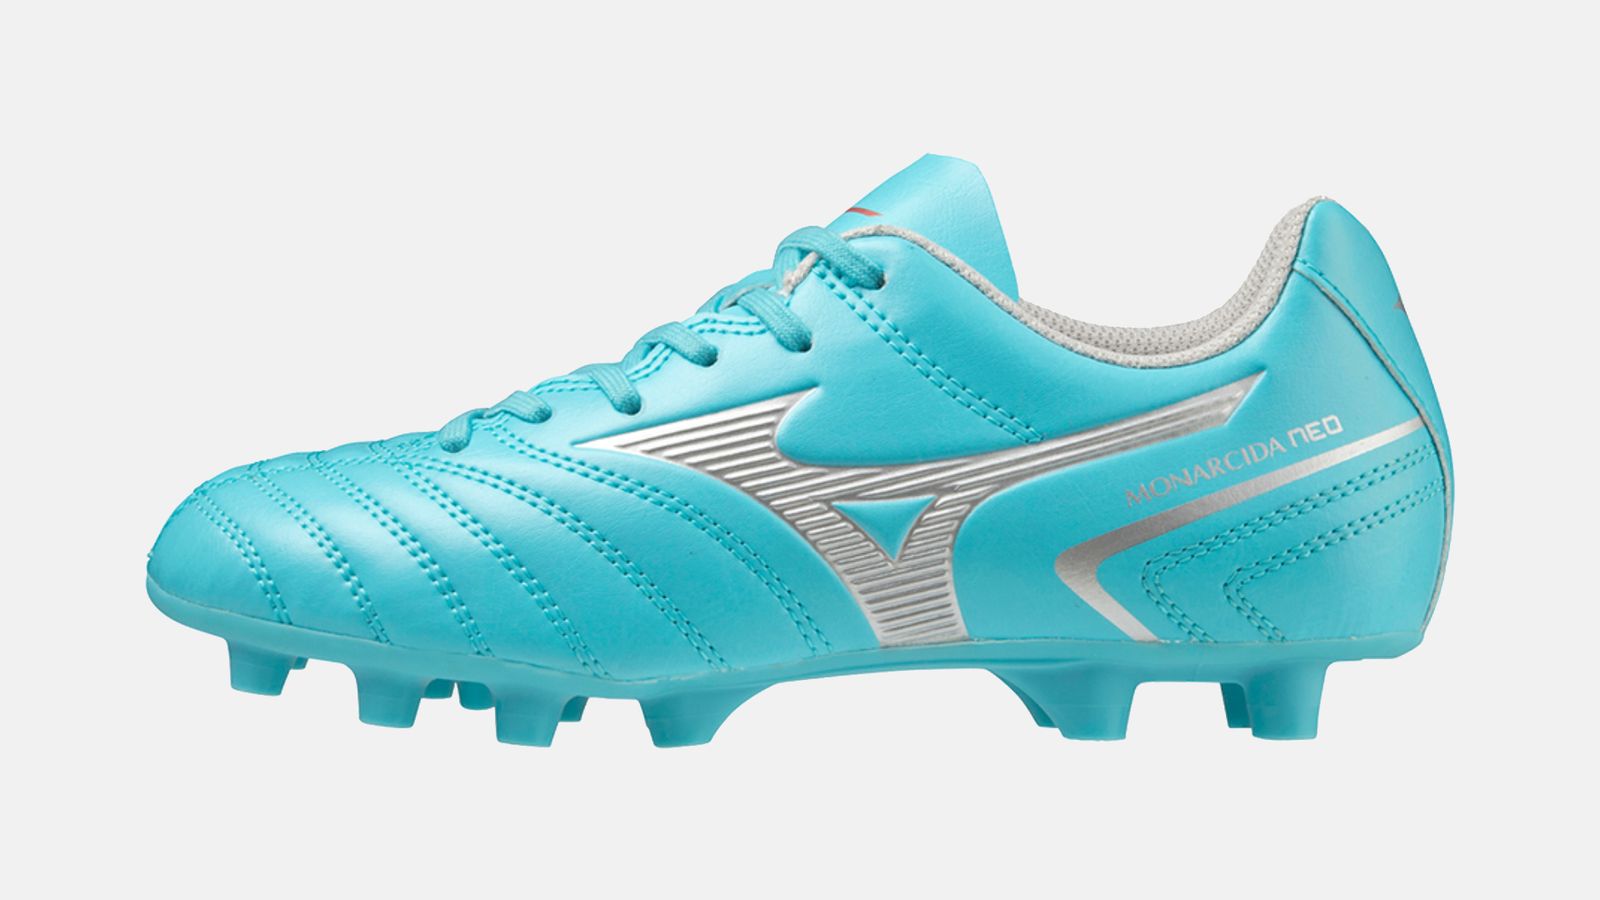 Mizuno Monarcida Neo II product image of a bright blue boot featuring white/grey details.